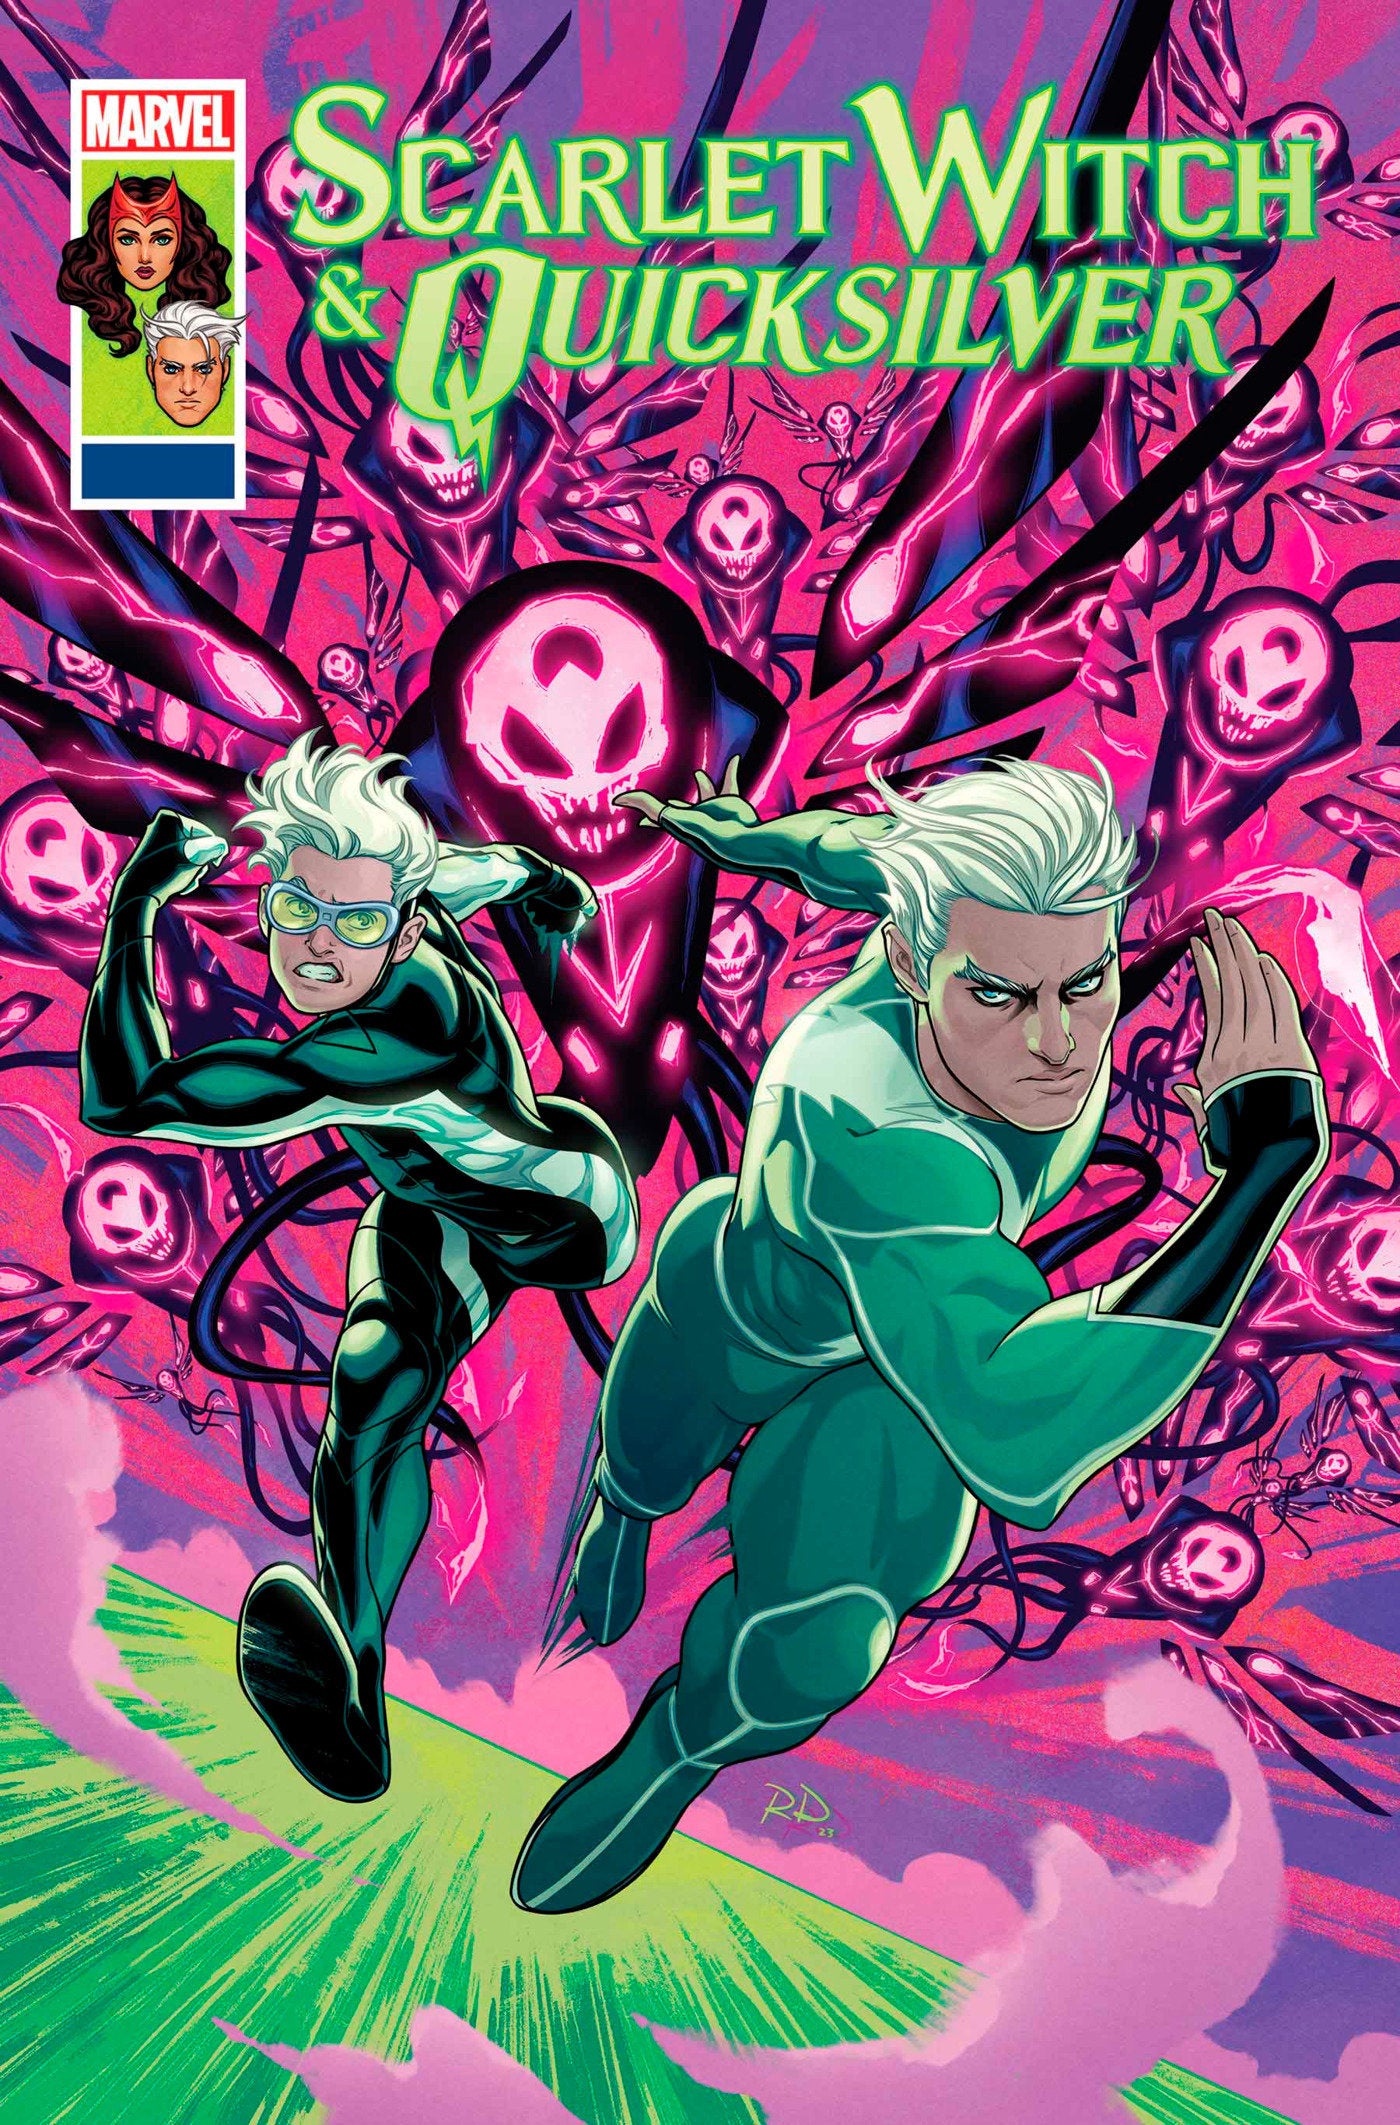 Scarlet Witch & Quicksilver #3 | Game Master's Emporium (The New GME)